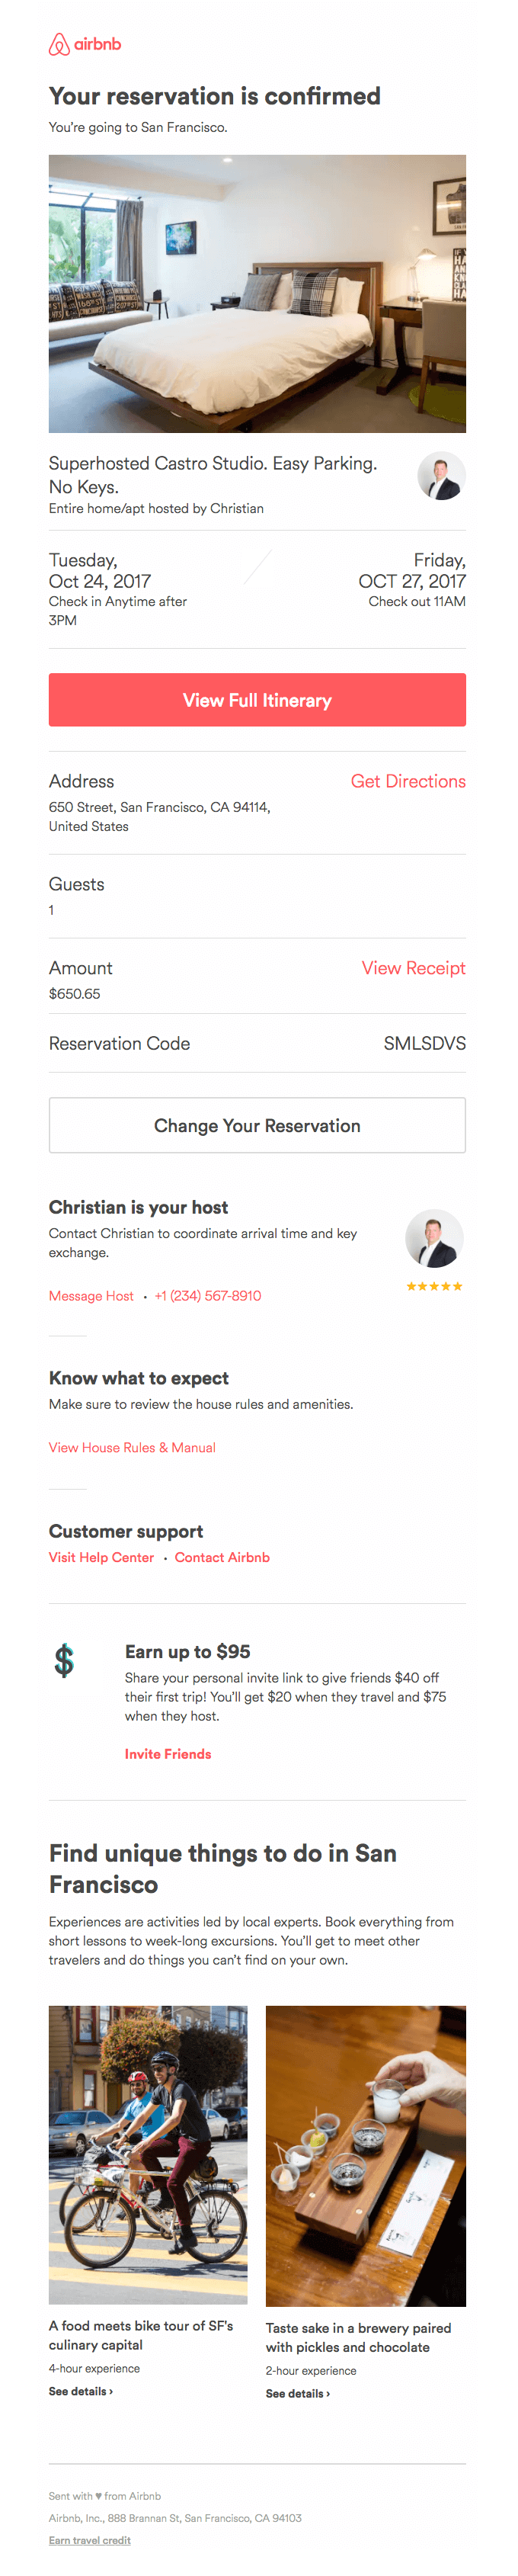 vwtoodvmy airbnb confirmation email